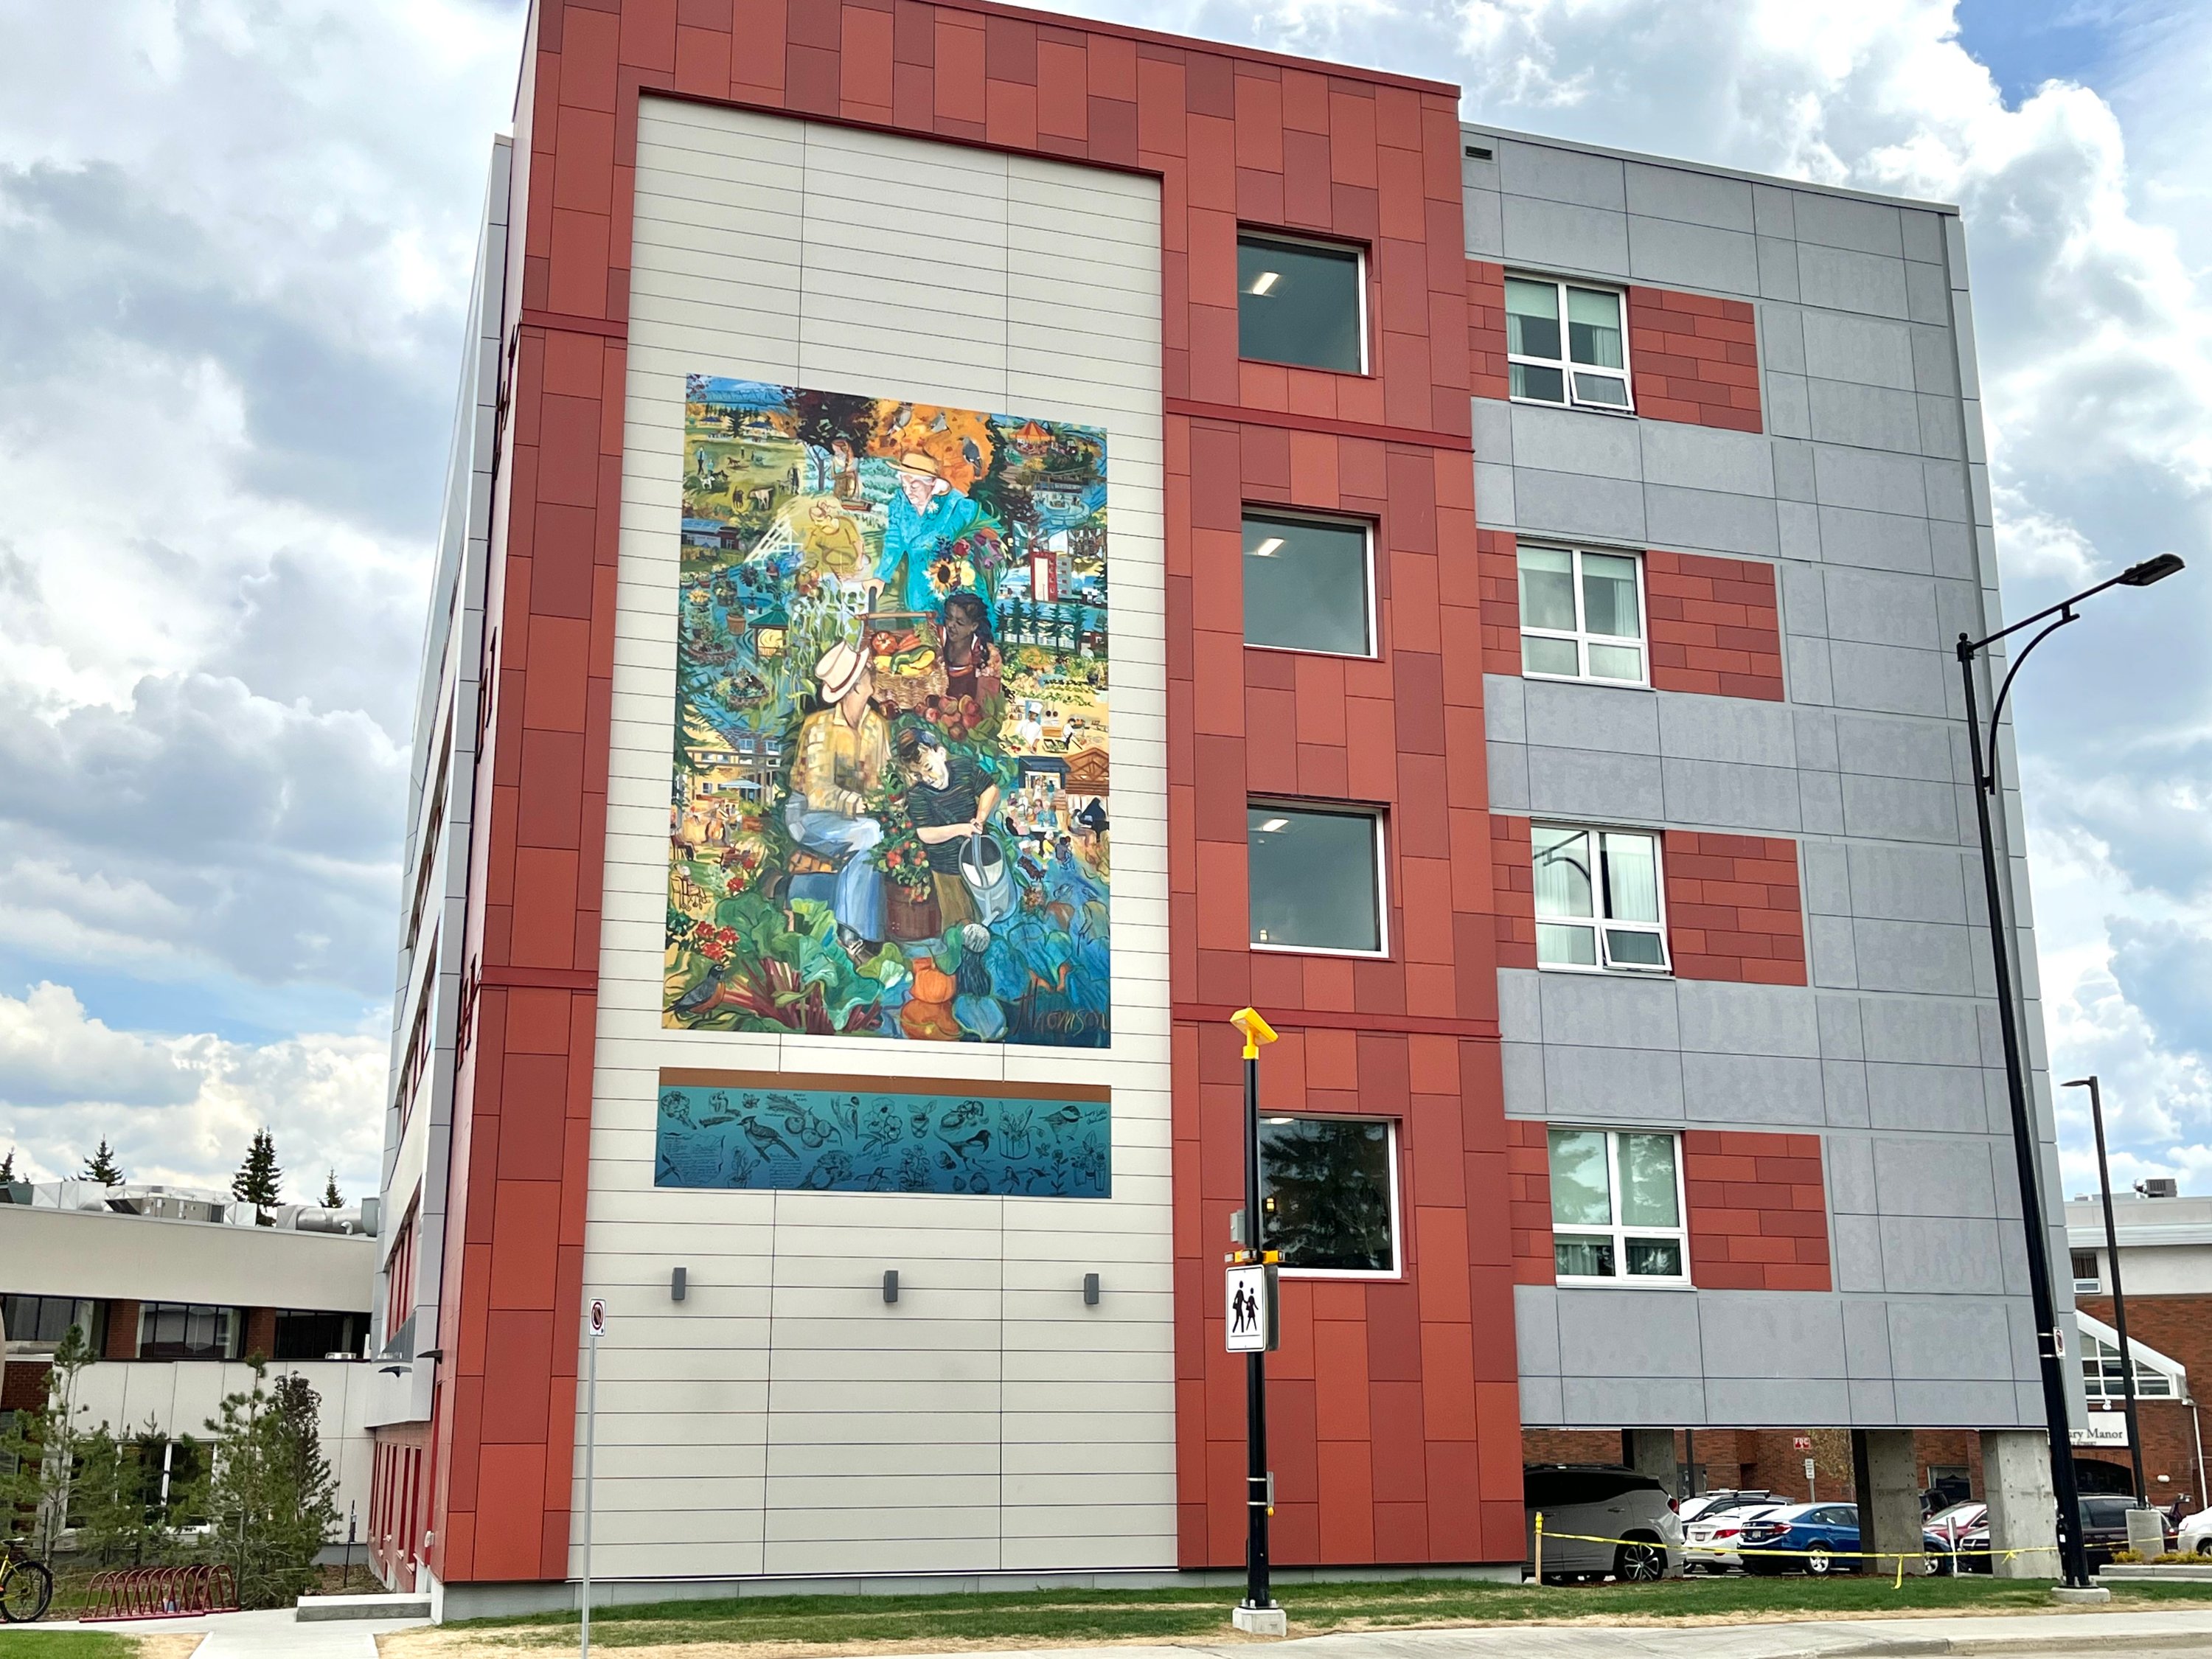 A towering mural on the side of the Canterbury Heights seniors' residence makes a distinctive landmark in Edmonton's Laurier Heights neighbourhood.